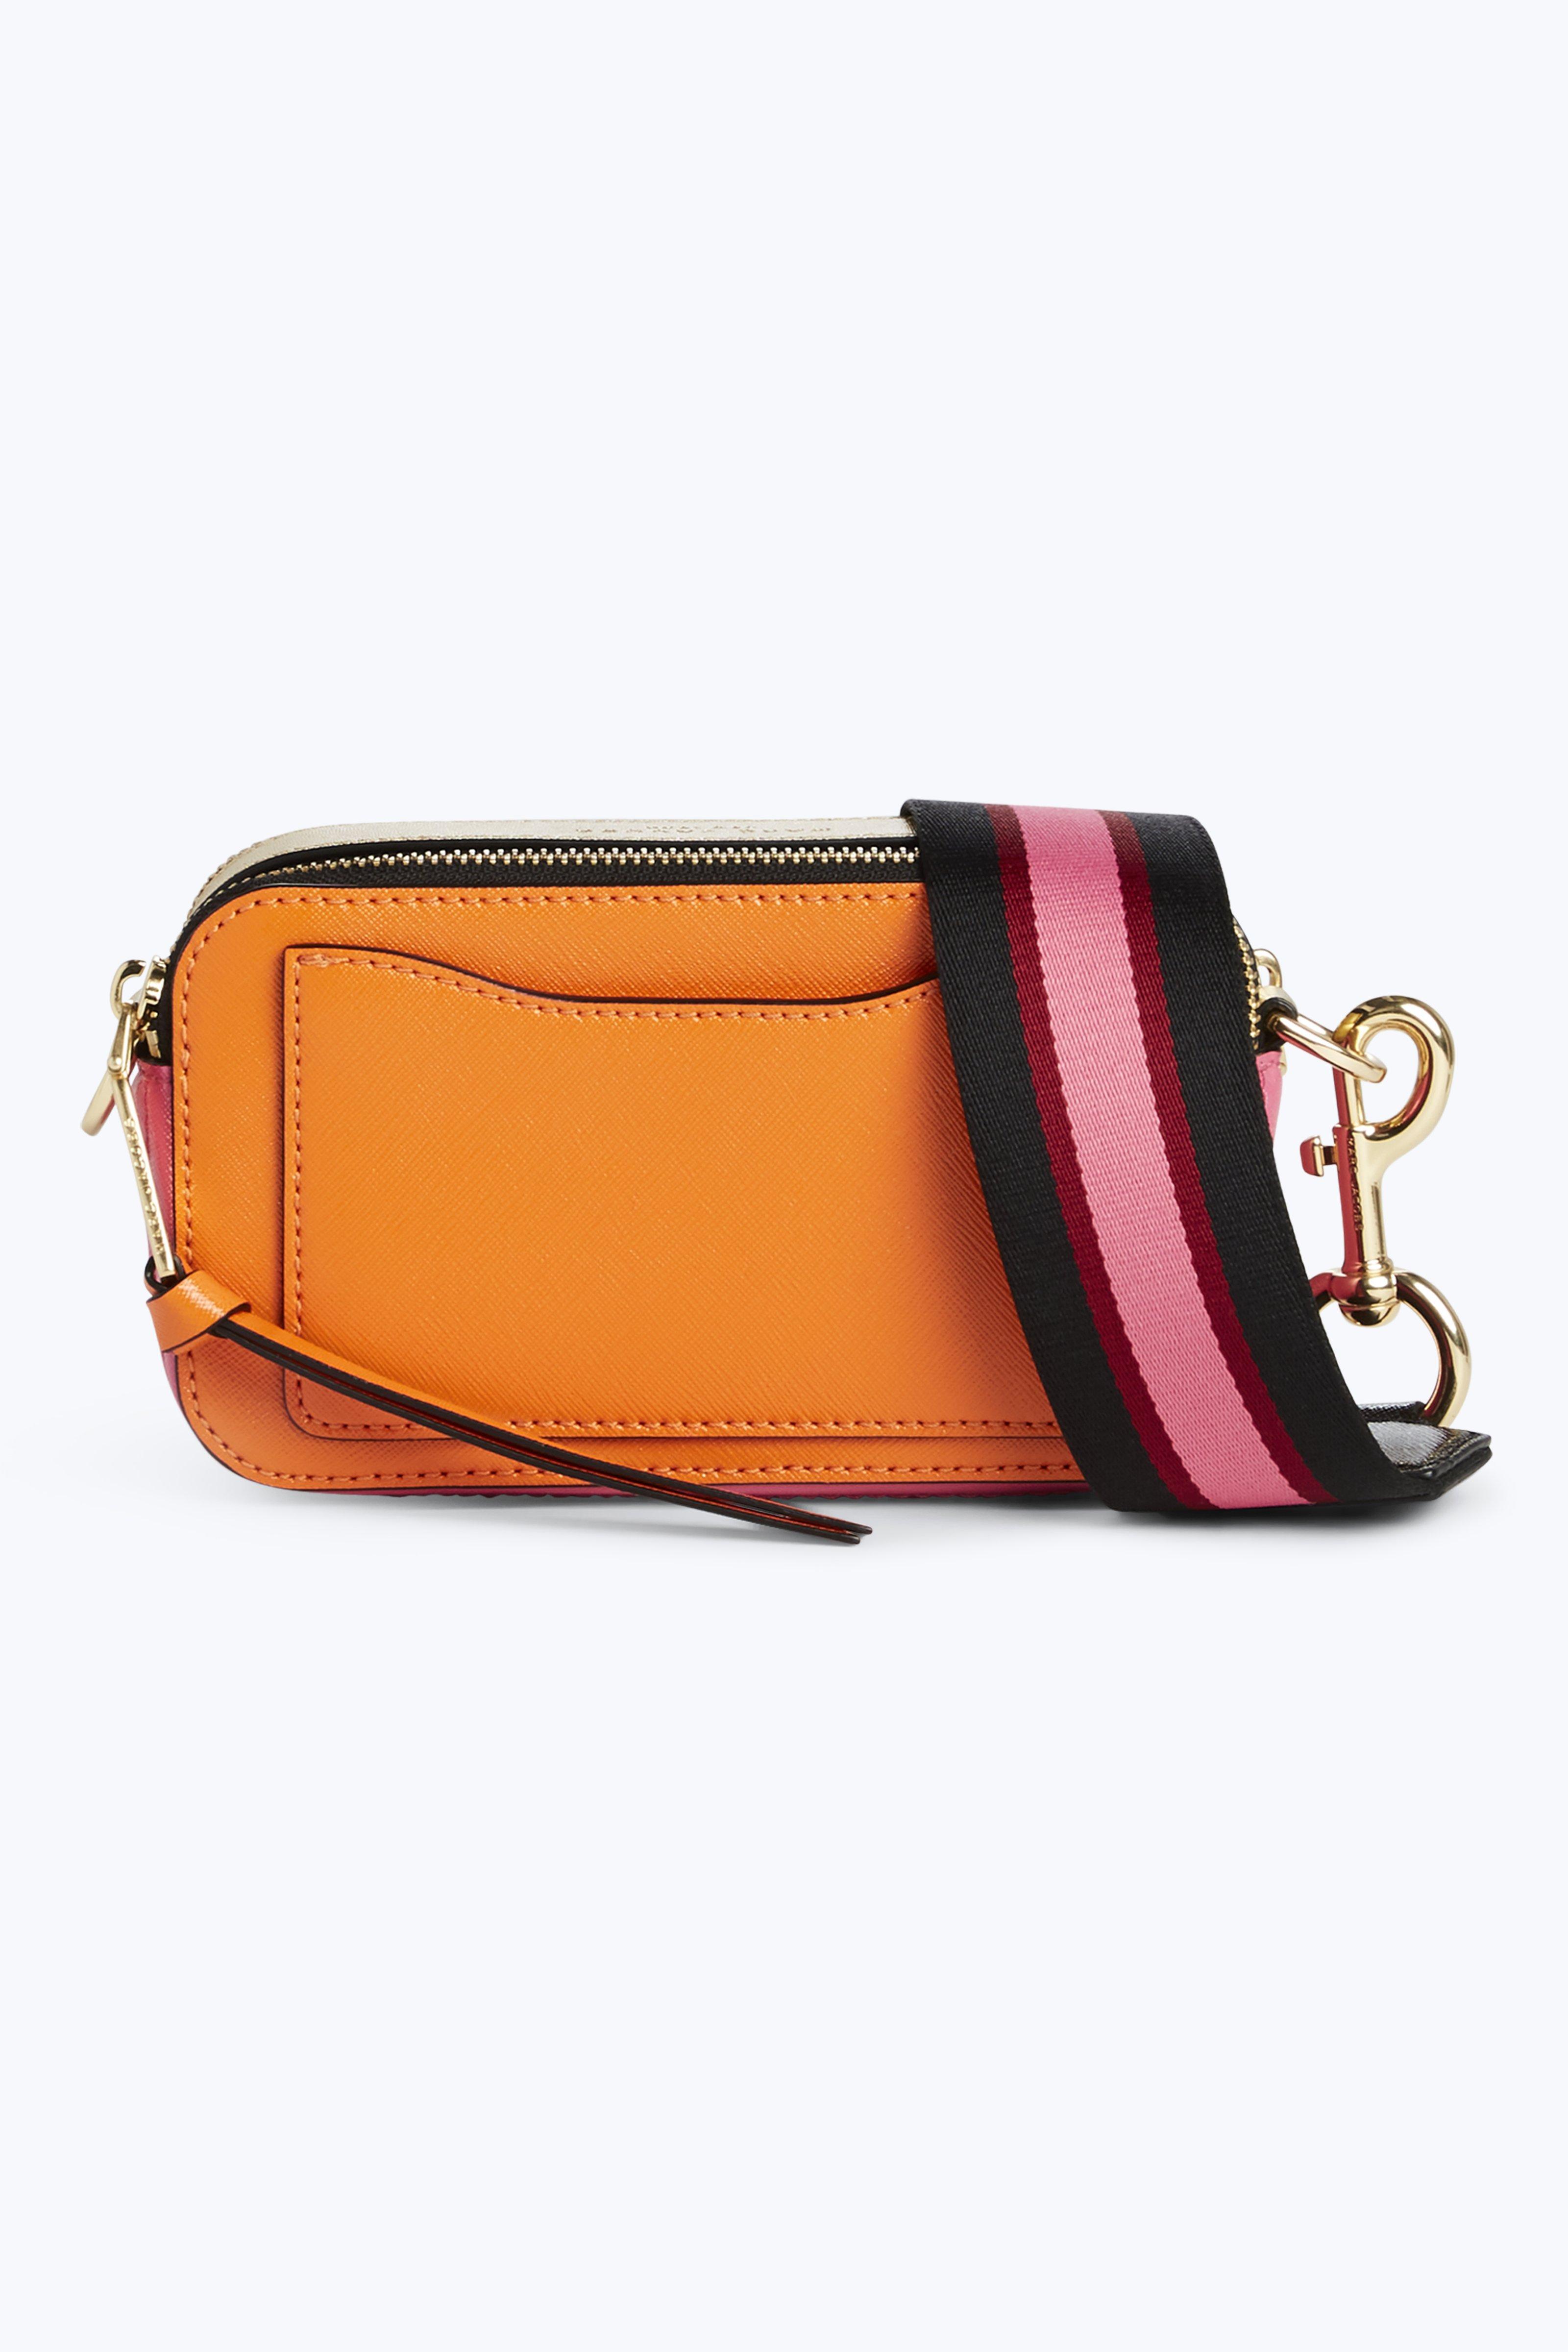 Marc Jacobs Snapshot Small Camera Bag in Orange - Lyst